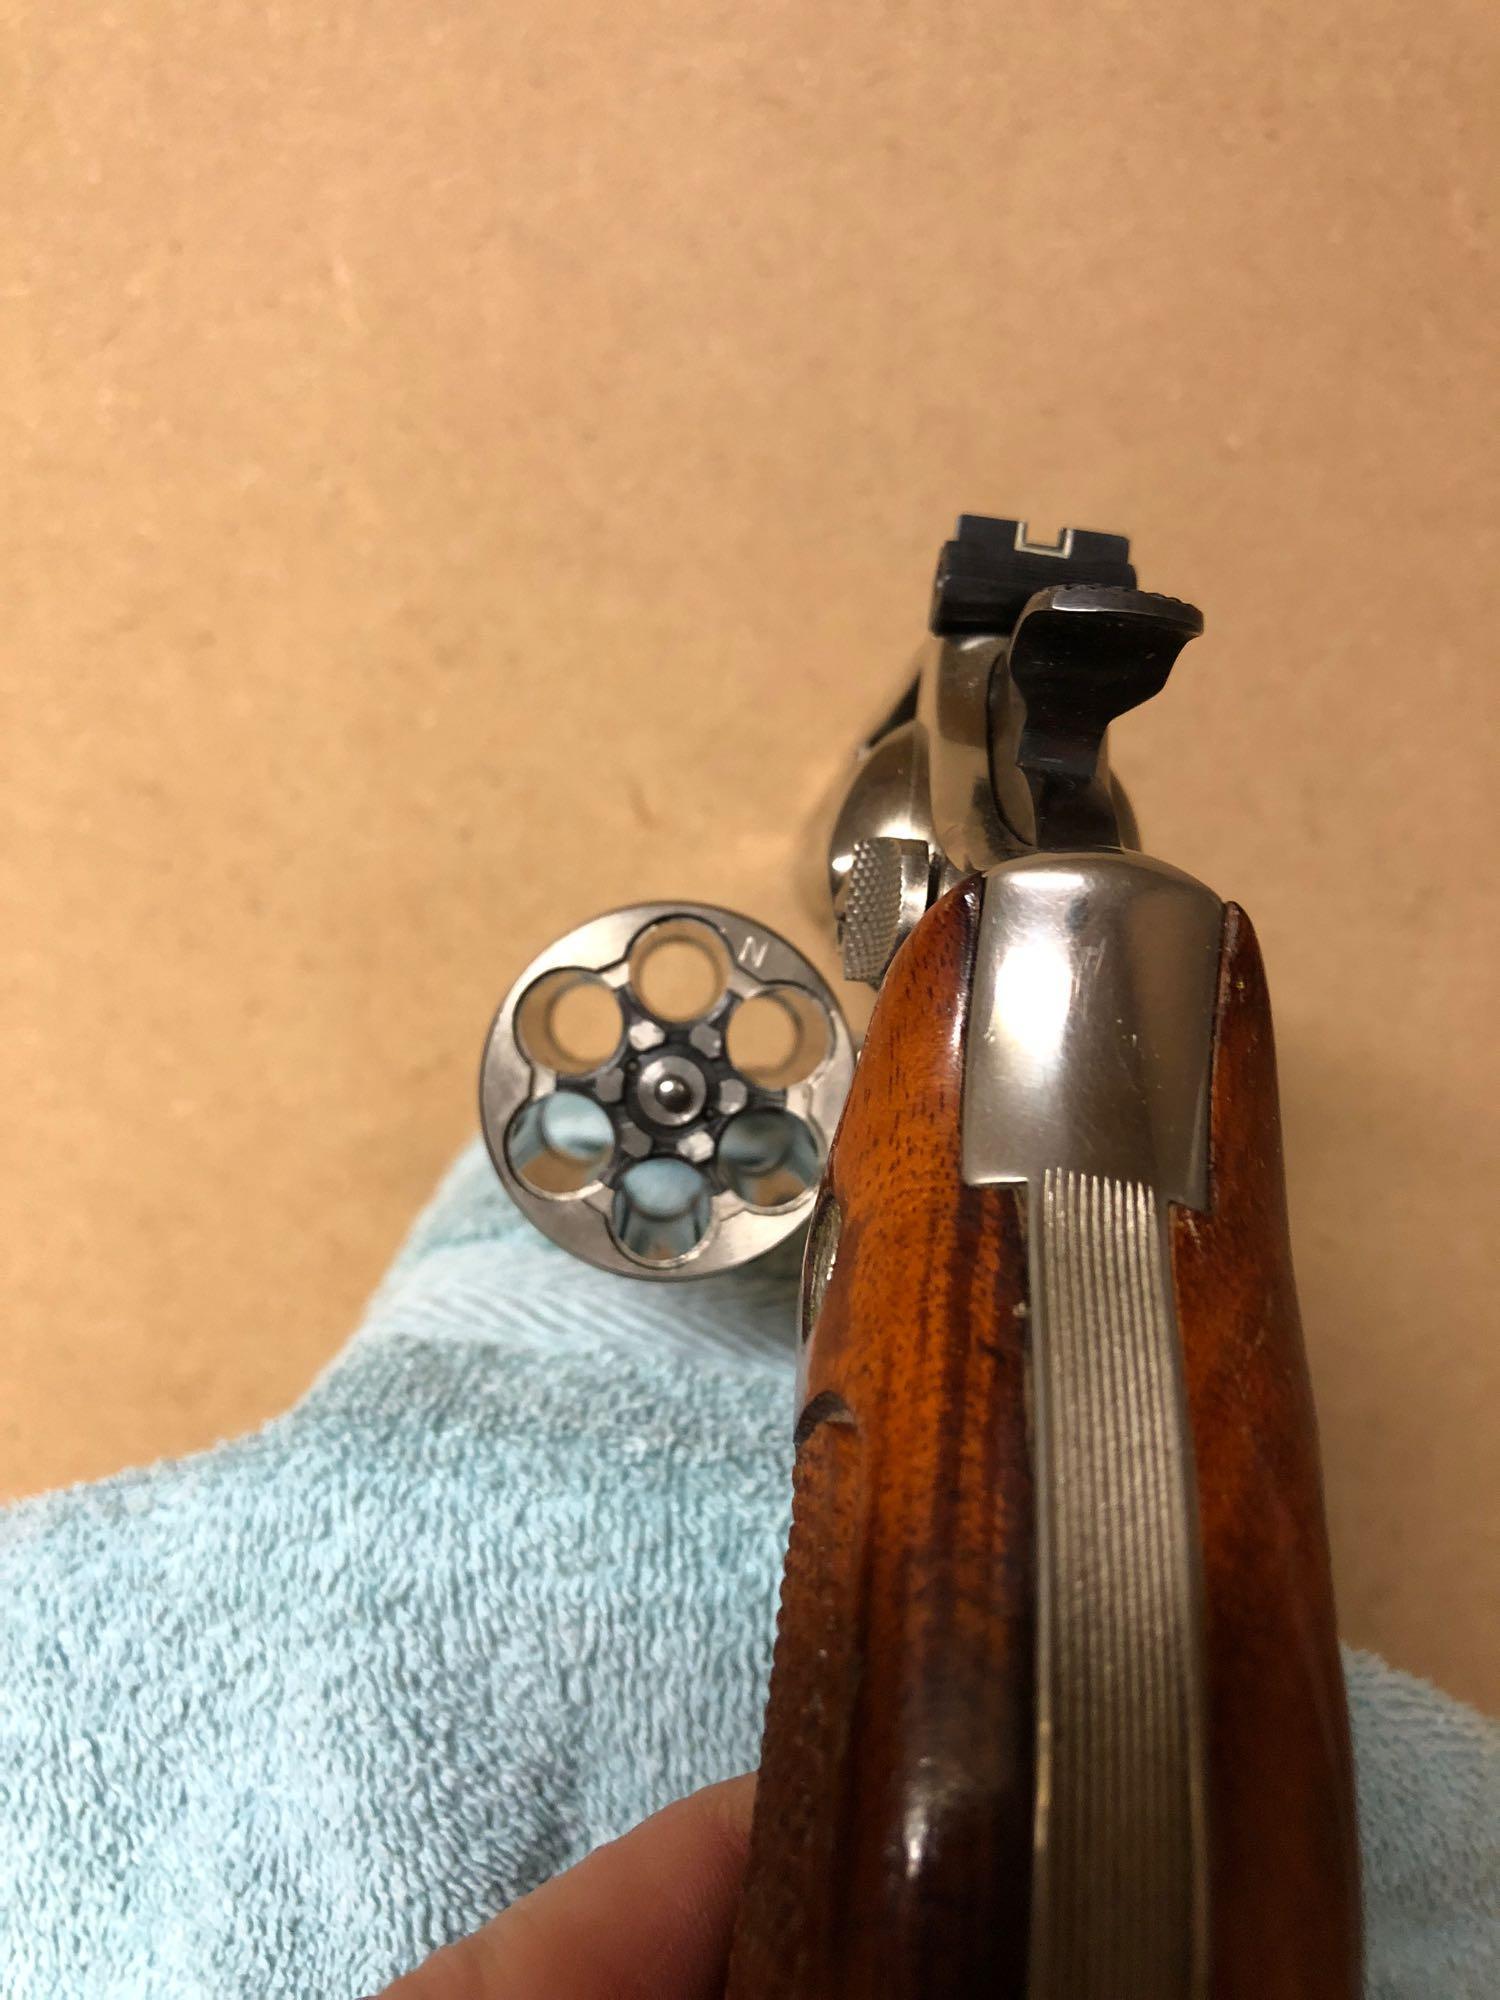 Smith & Wesson Model 19-4 .357 mag SN: 74059